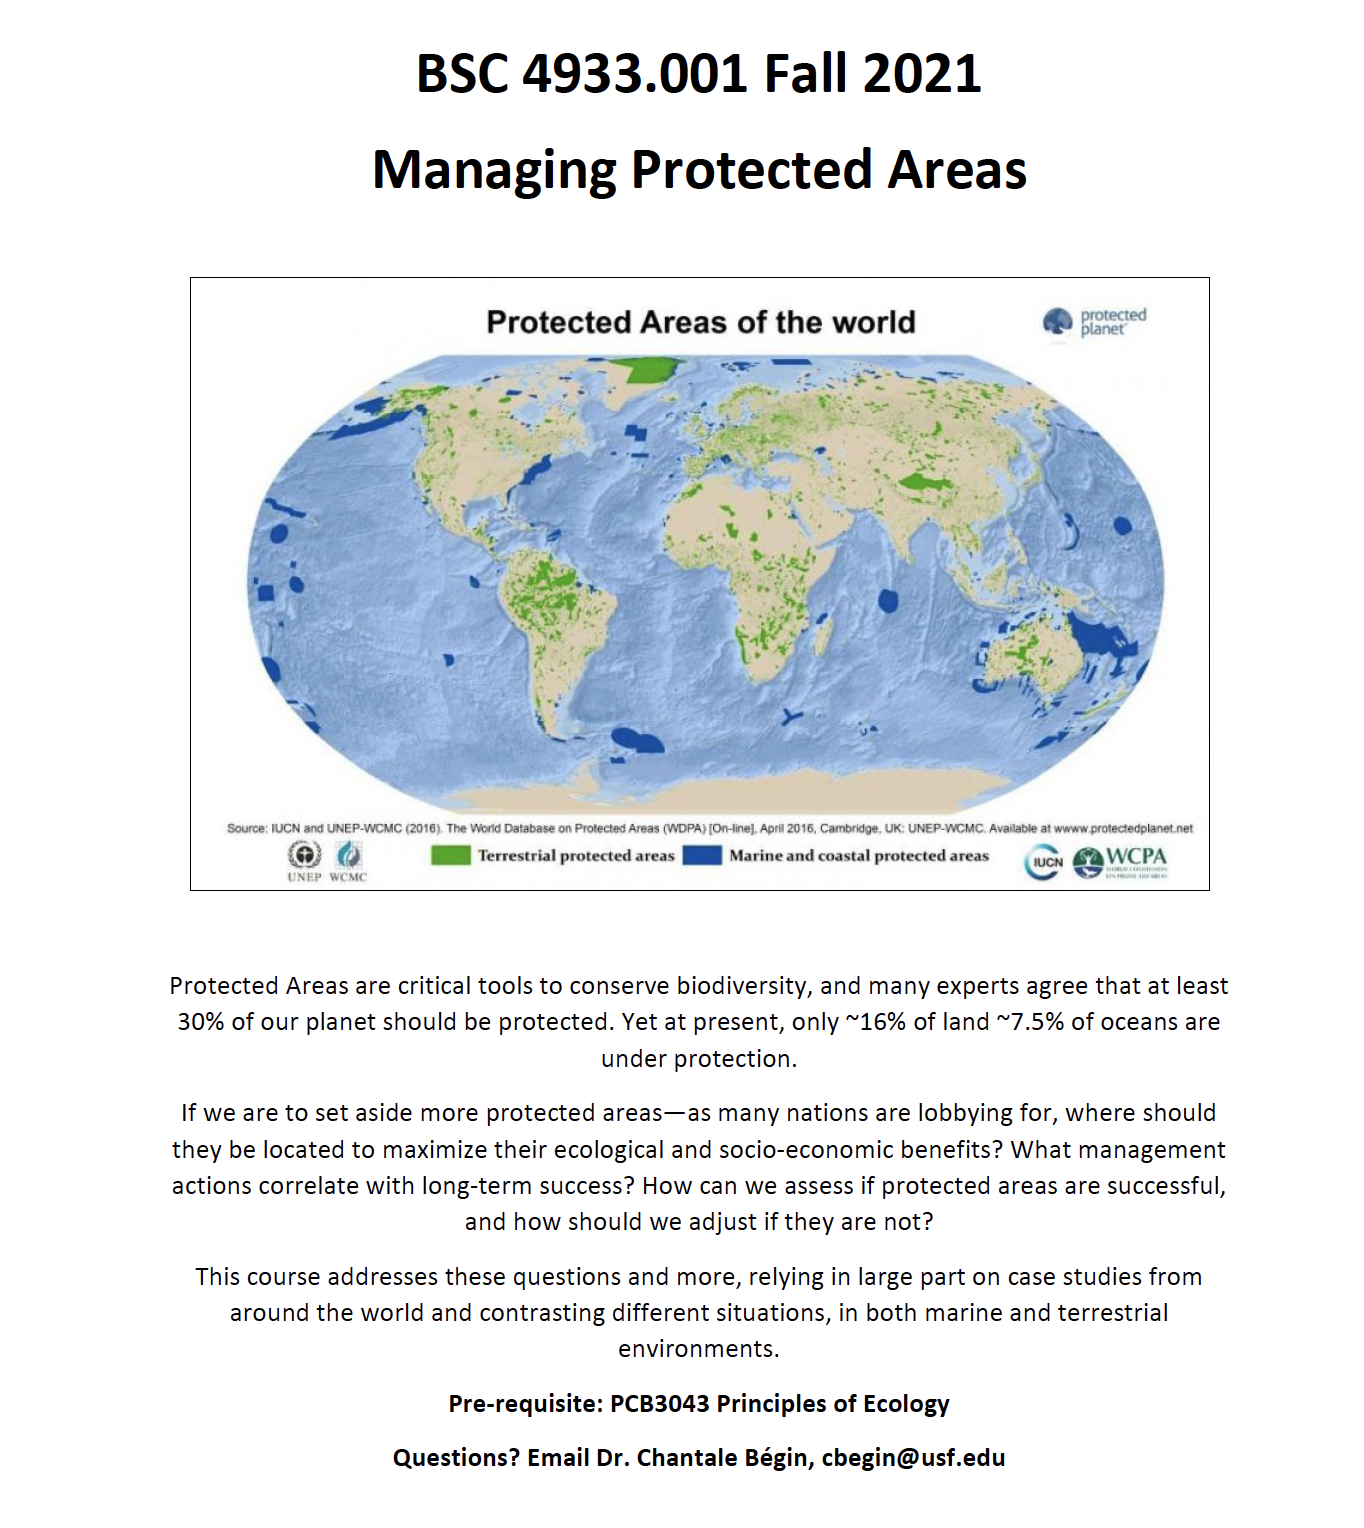 Managing protected areas flyer